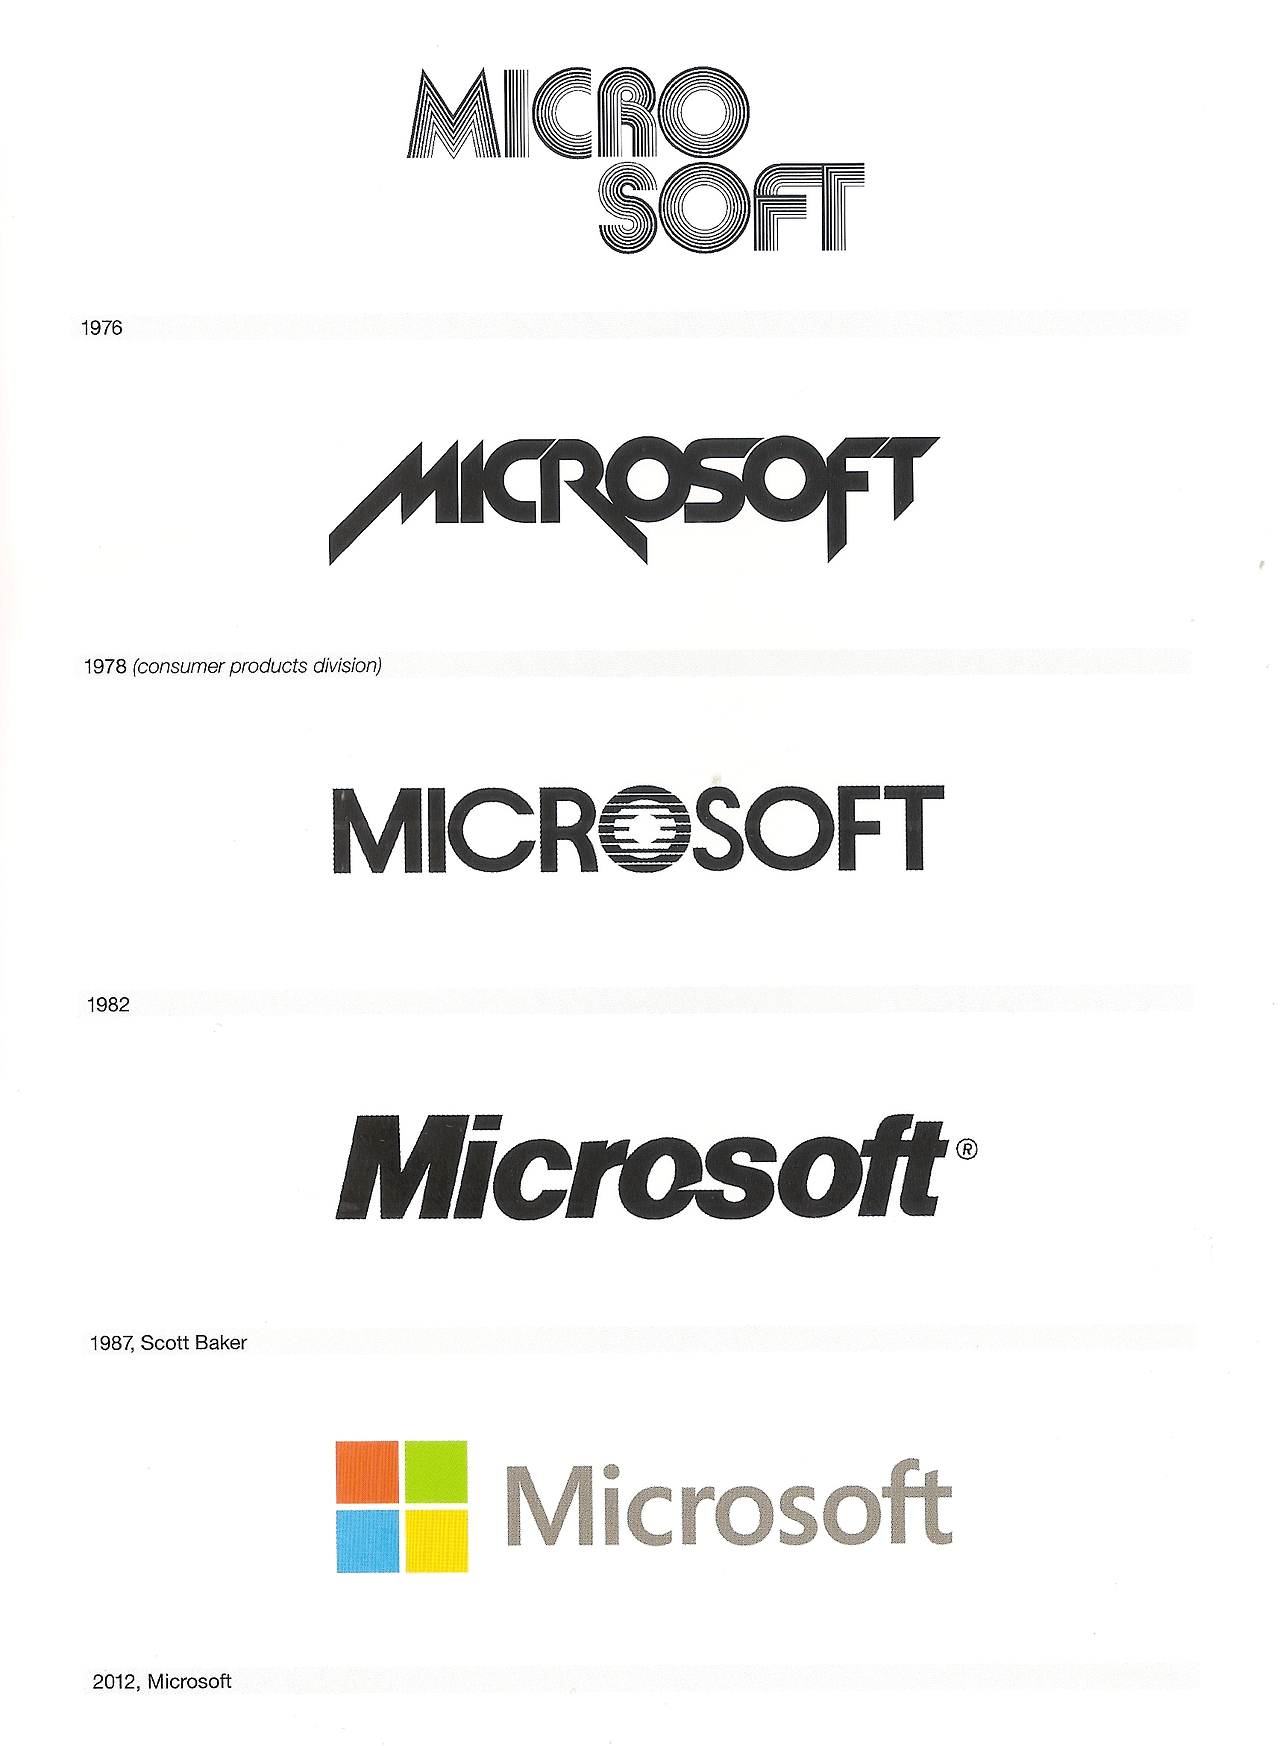 Real Microsoft Logo - The Microsoft logo throughout the years. My brother had Microsoft ...